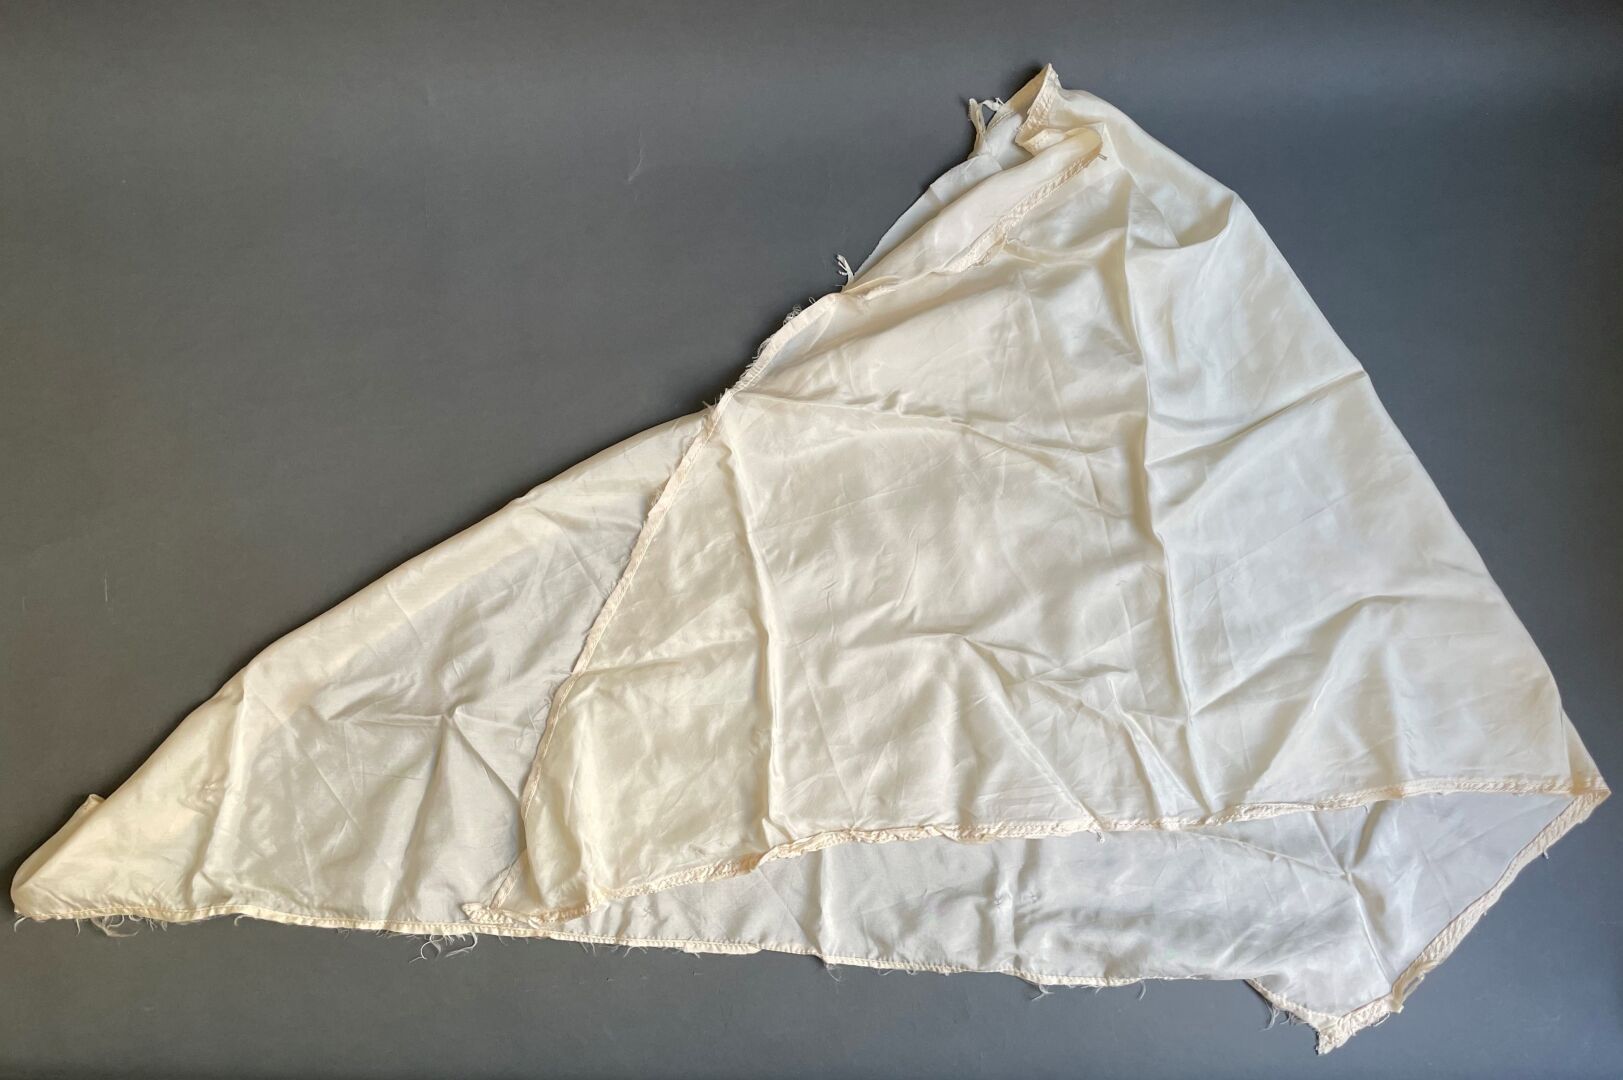 Null Fragment of parachute fabric from 1943